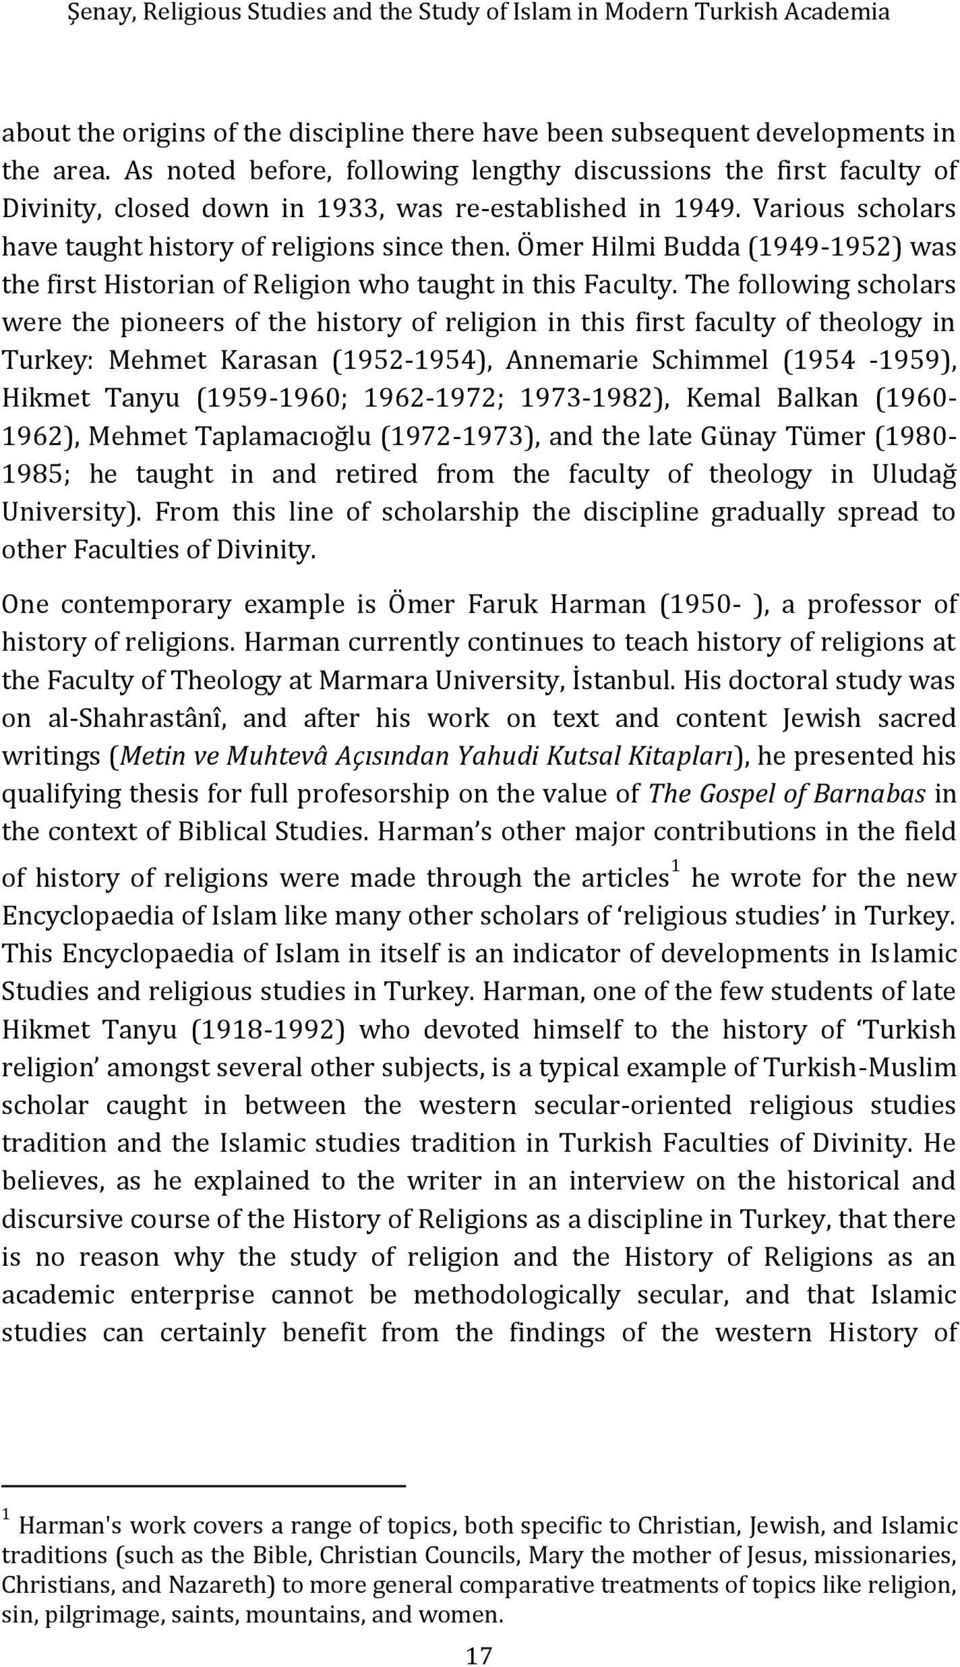 Ömer Hilmi Budda (1949-1952) was the first Historian of Religion who taught in this Faculty.